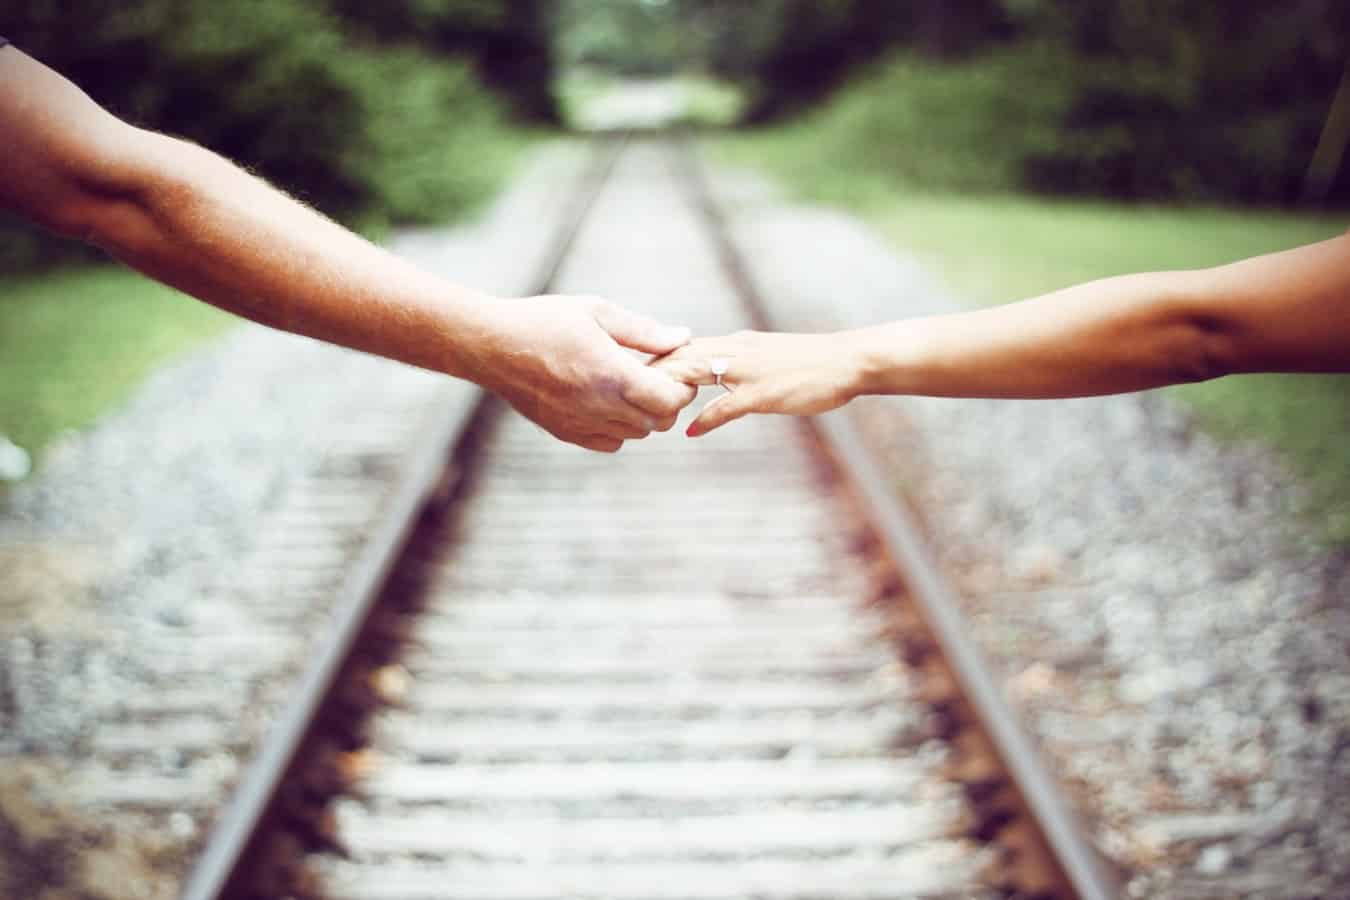 Two people hold hands near a railway station.